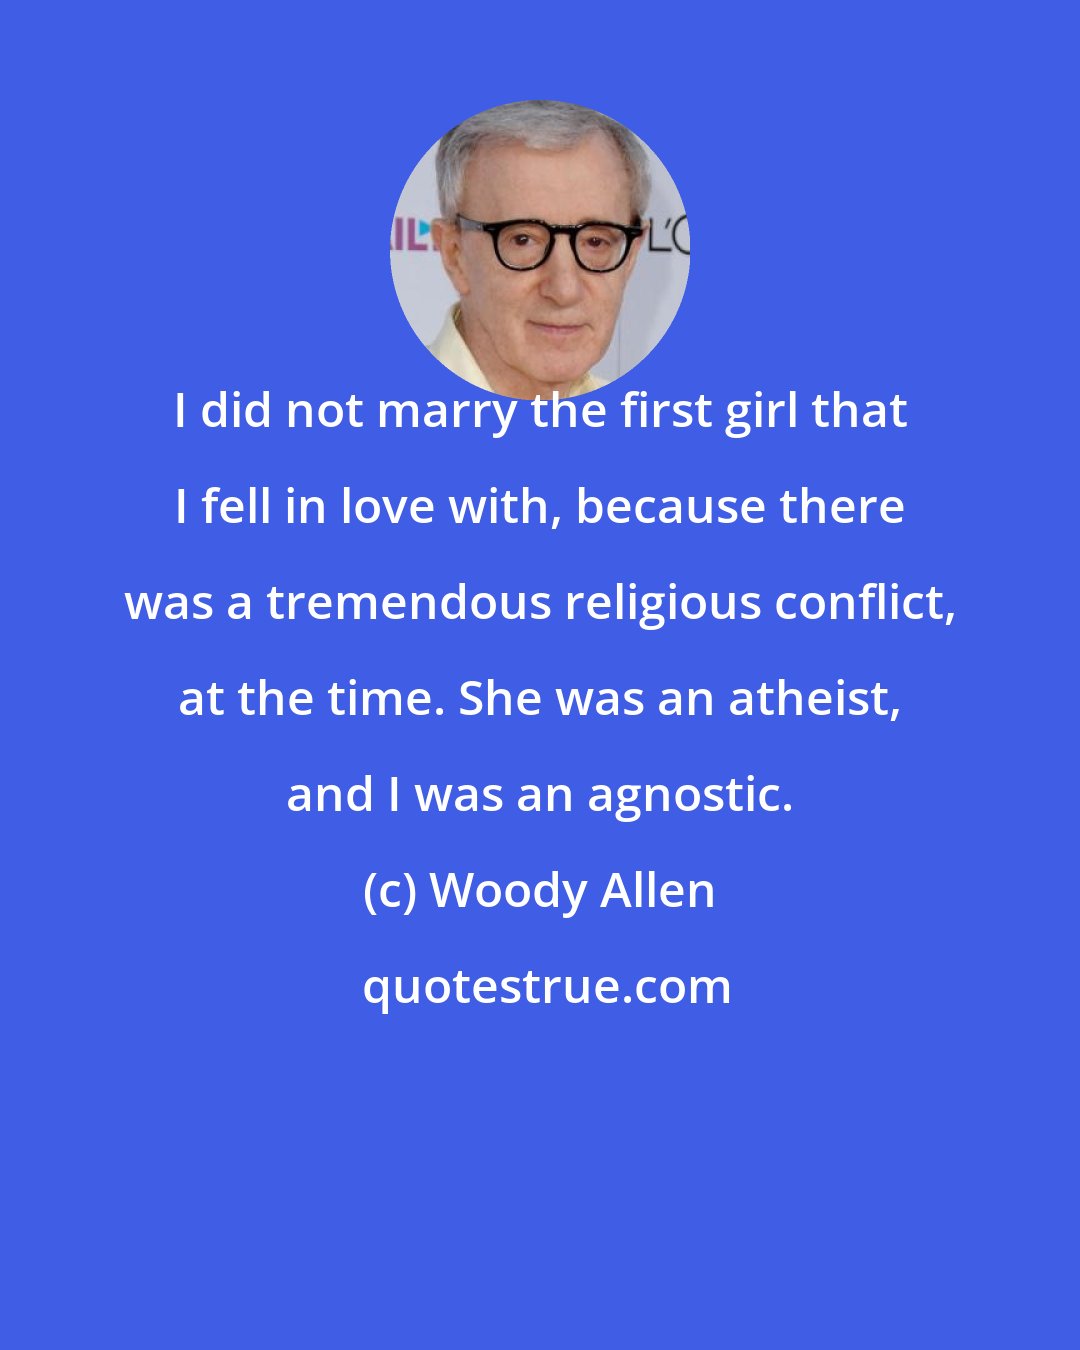 Woody Allen: I did not marry the first girl that I fell in love with, because there was a tremendous religious conflict, at the time. She was an atheist, and I was an agnostic.